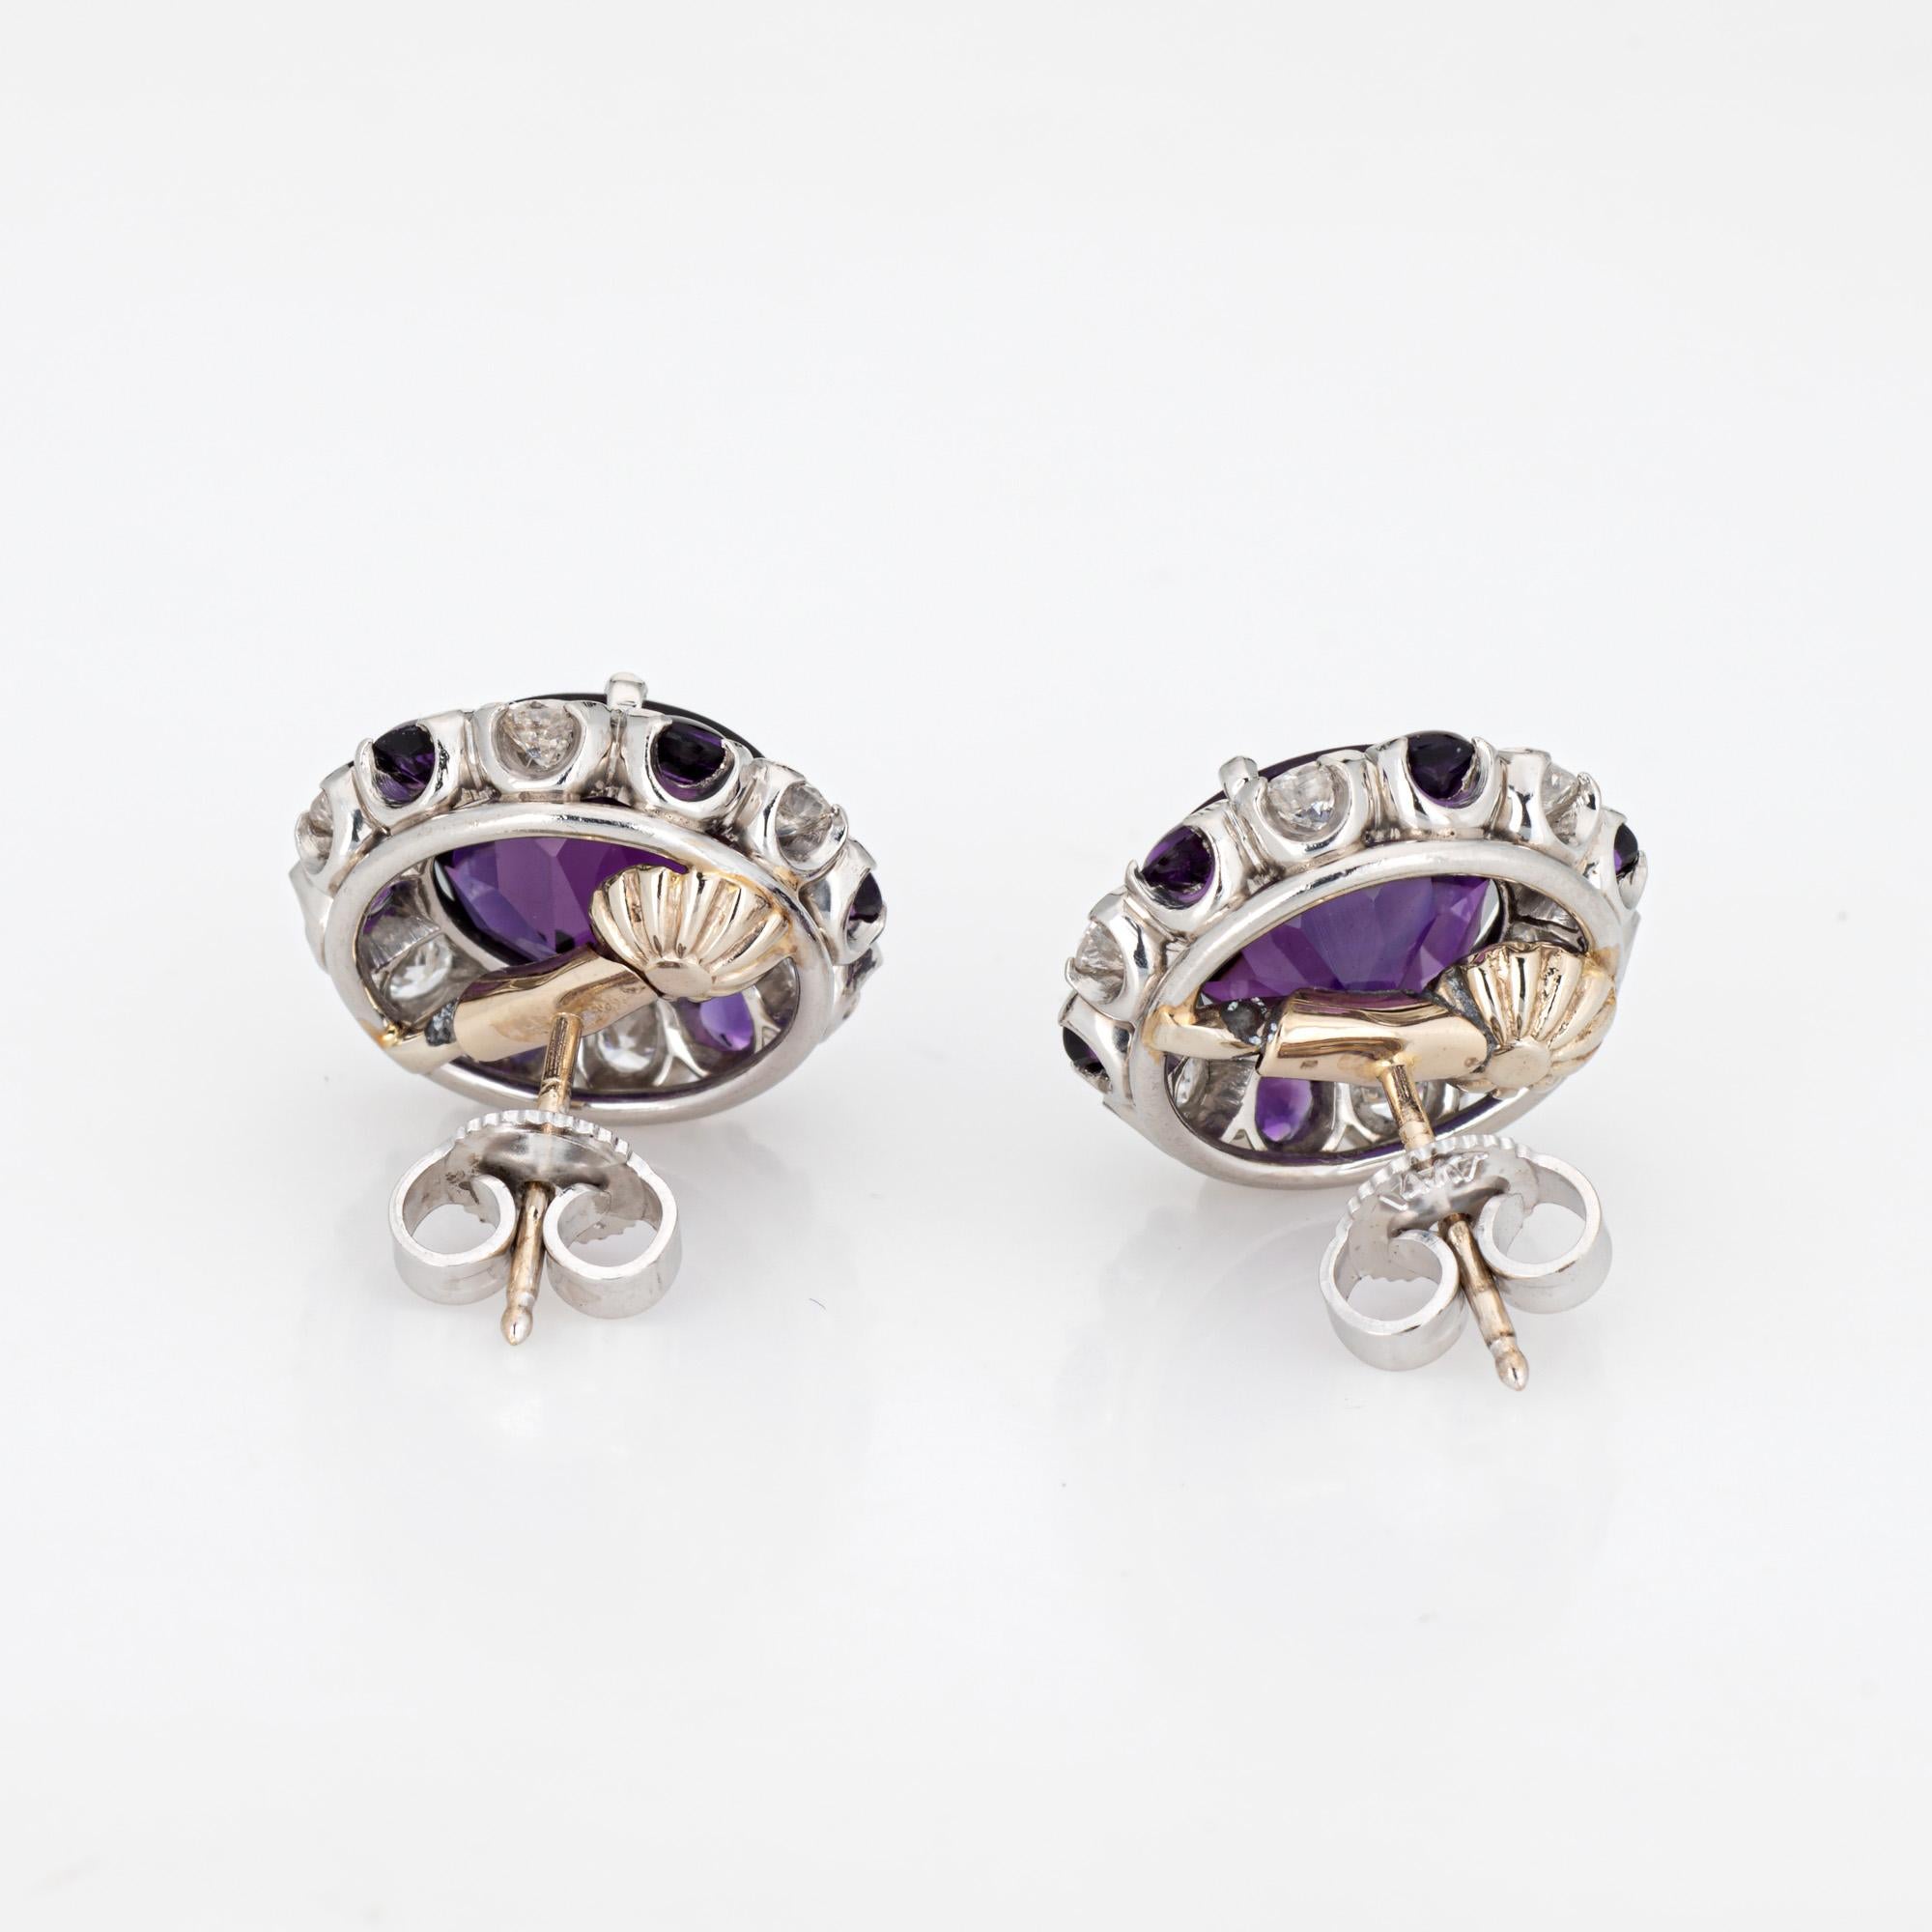 Elegant pair of vintage amethyst & diamond stud earrings crafted in 900 platinum and 14k white gold.  

Cabochon cut center set amethysts measure 9mm with accenting smaller amethysts measuring 2mm. Round brilliant cut diamonds total an estimated